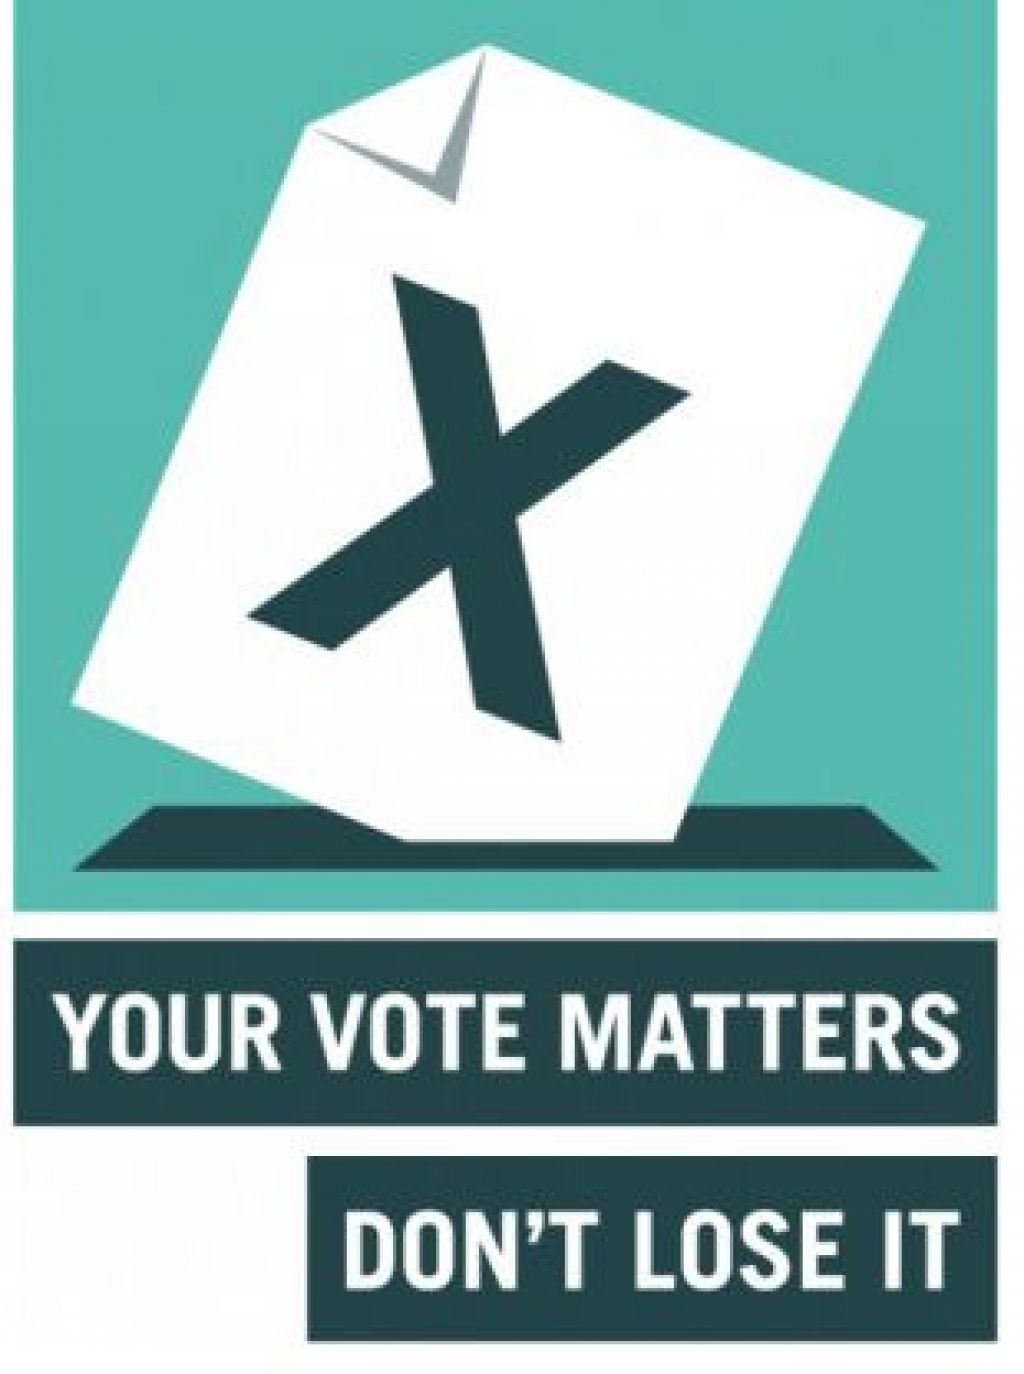 Don’t lose your right to vote  image